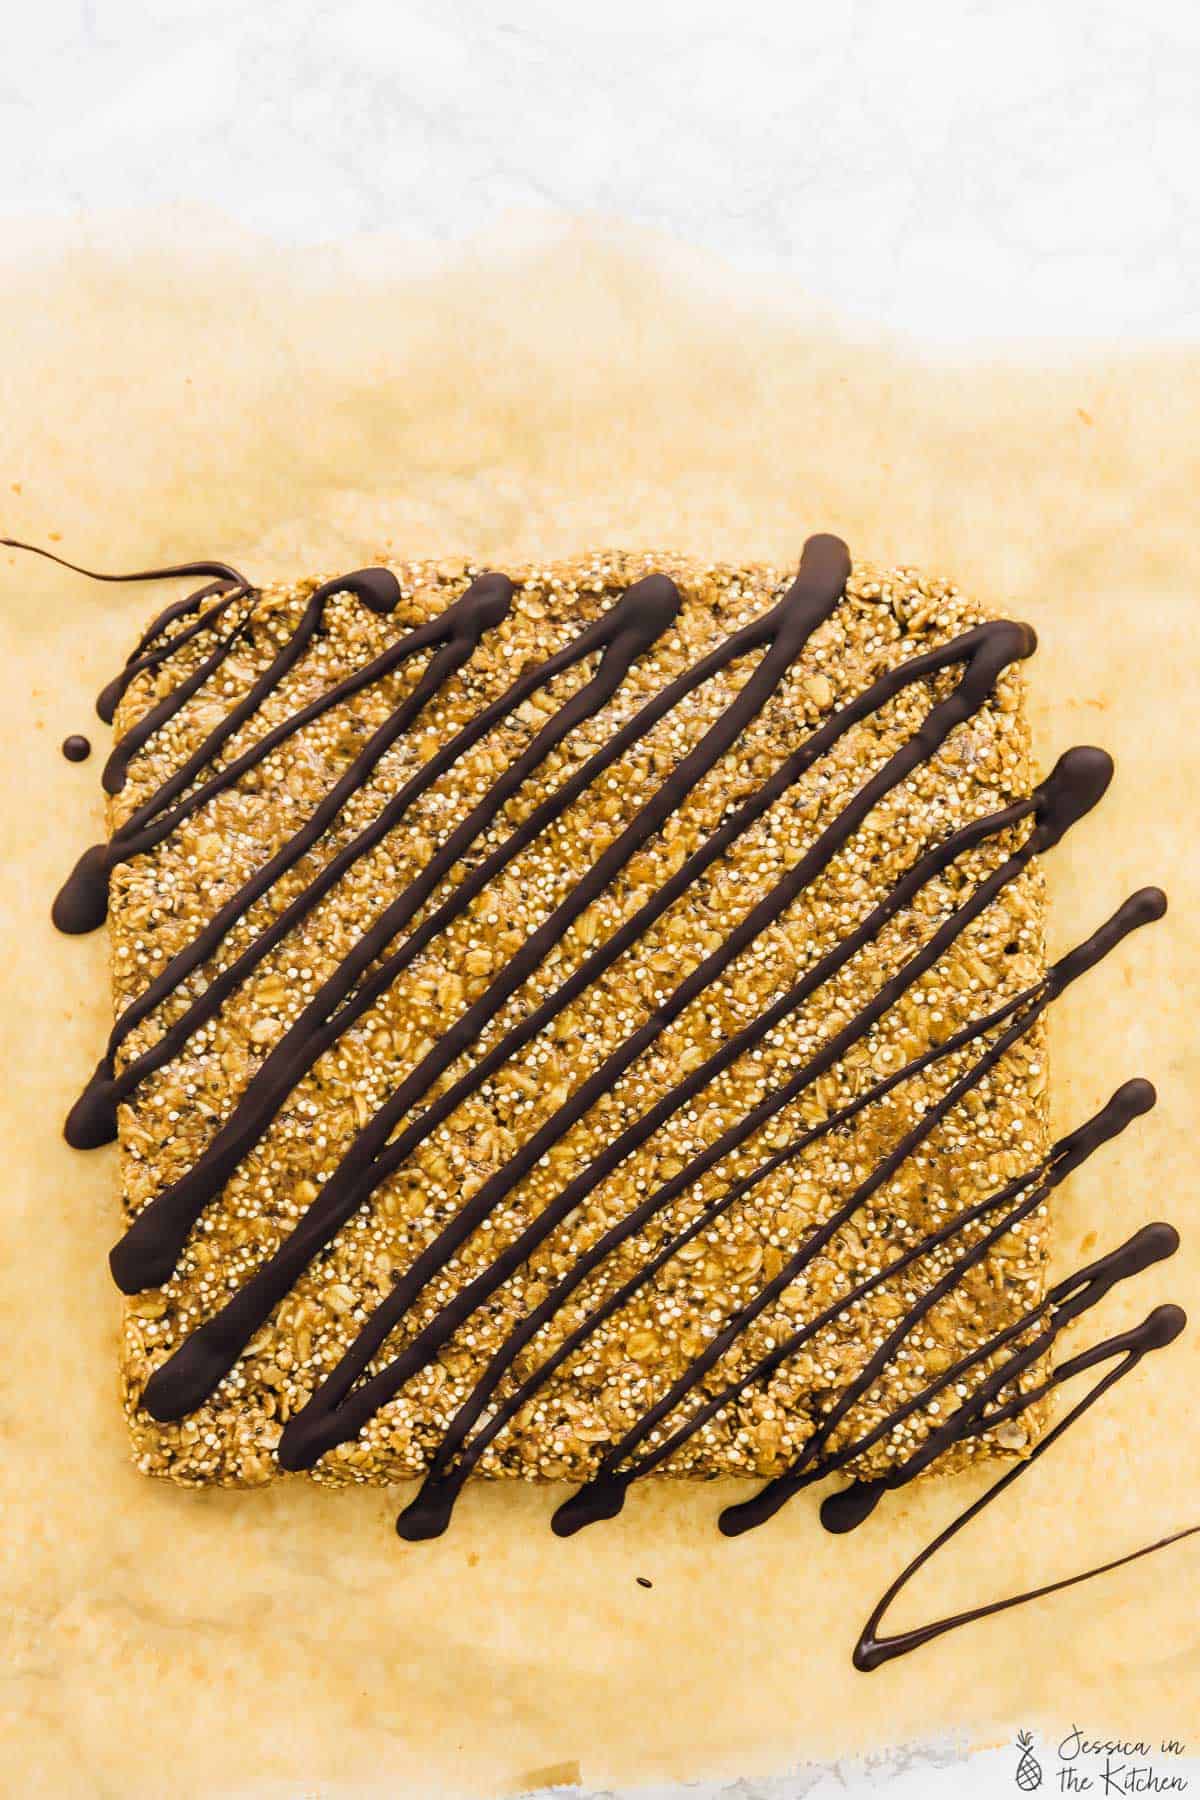 A slab of granola, drizzled in chocolate. 